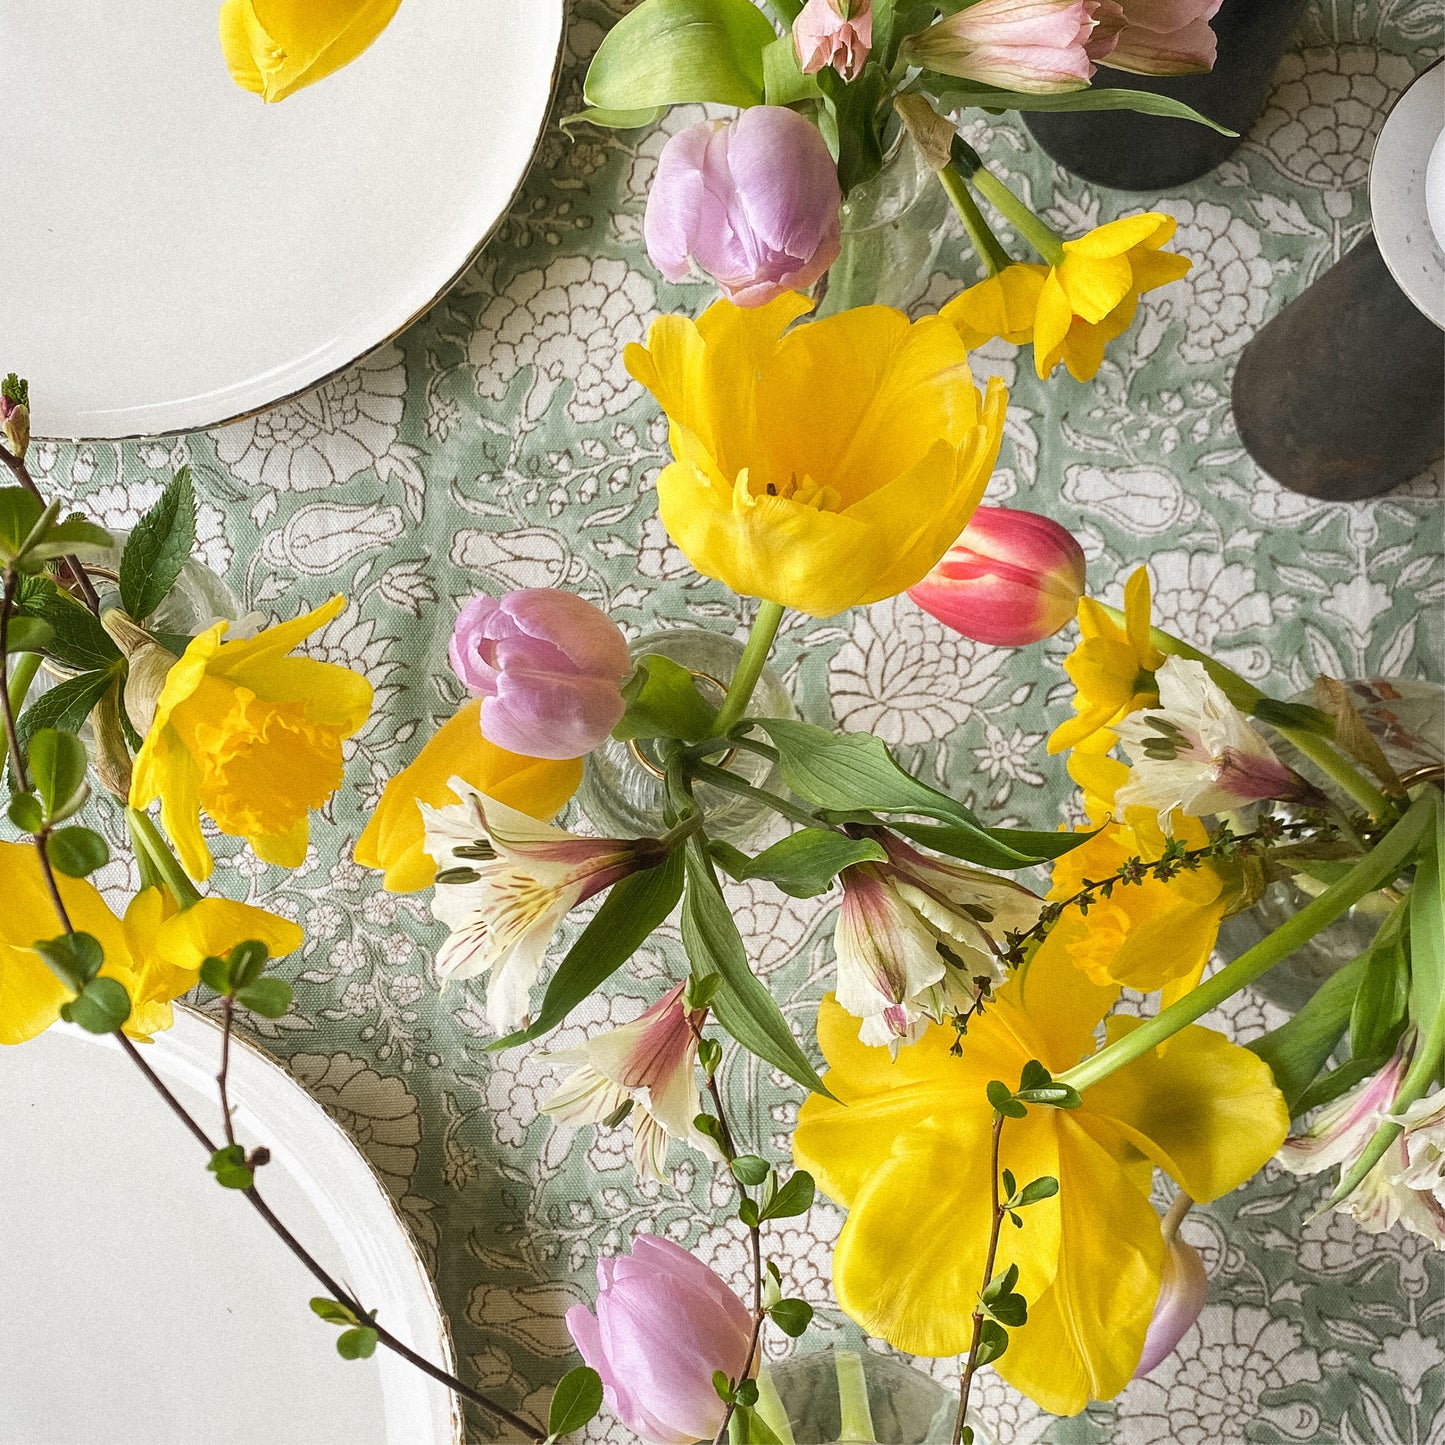 Floral Green Tablecloth